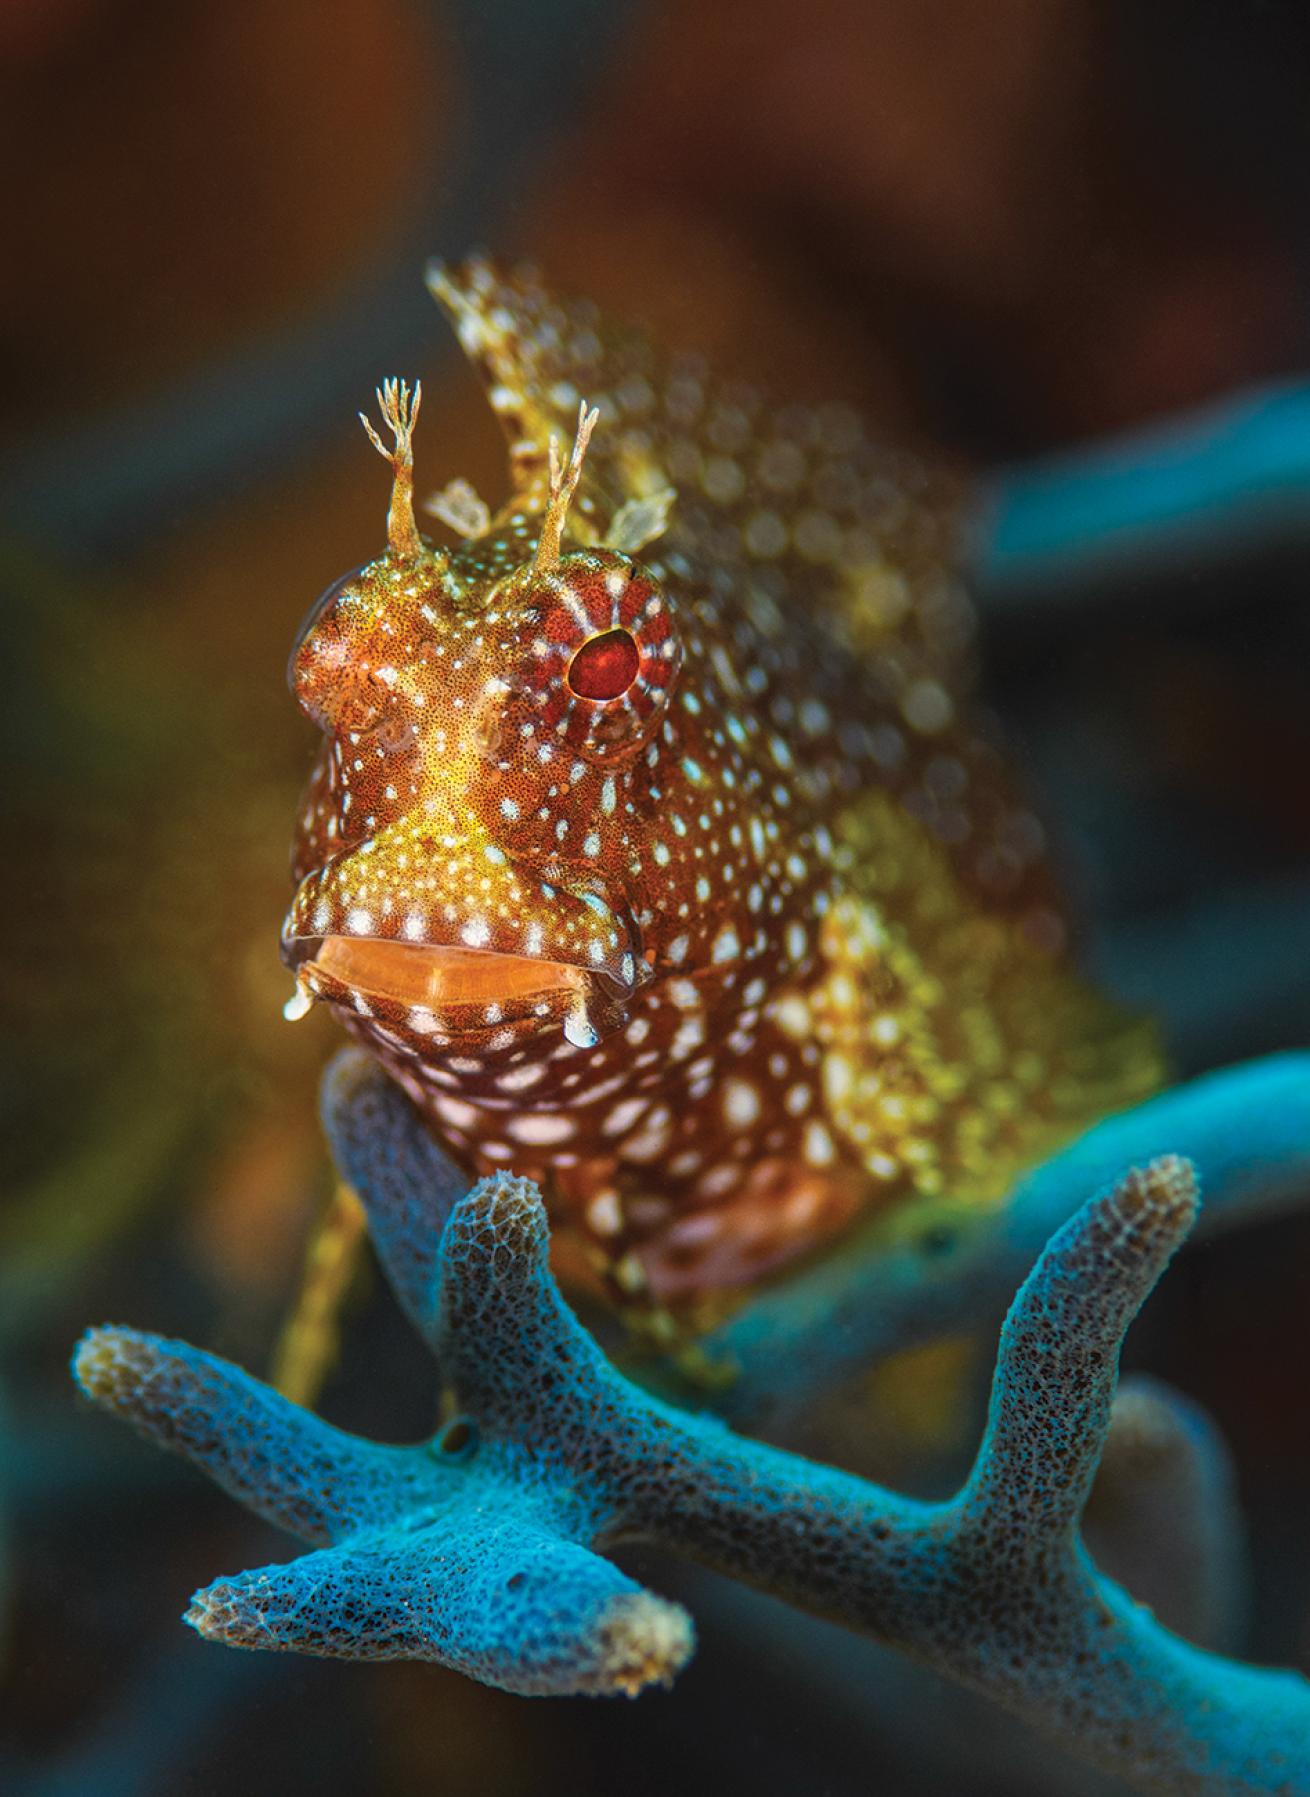 A spotted blenny with red eyes sits on a blue sponge